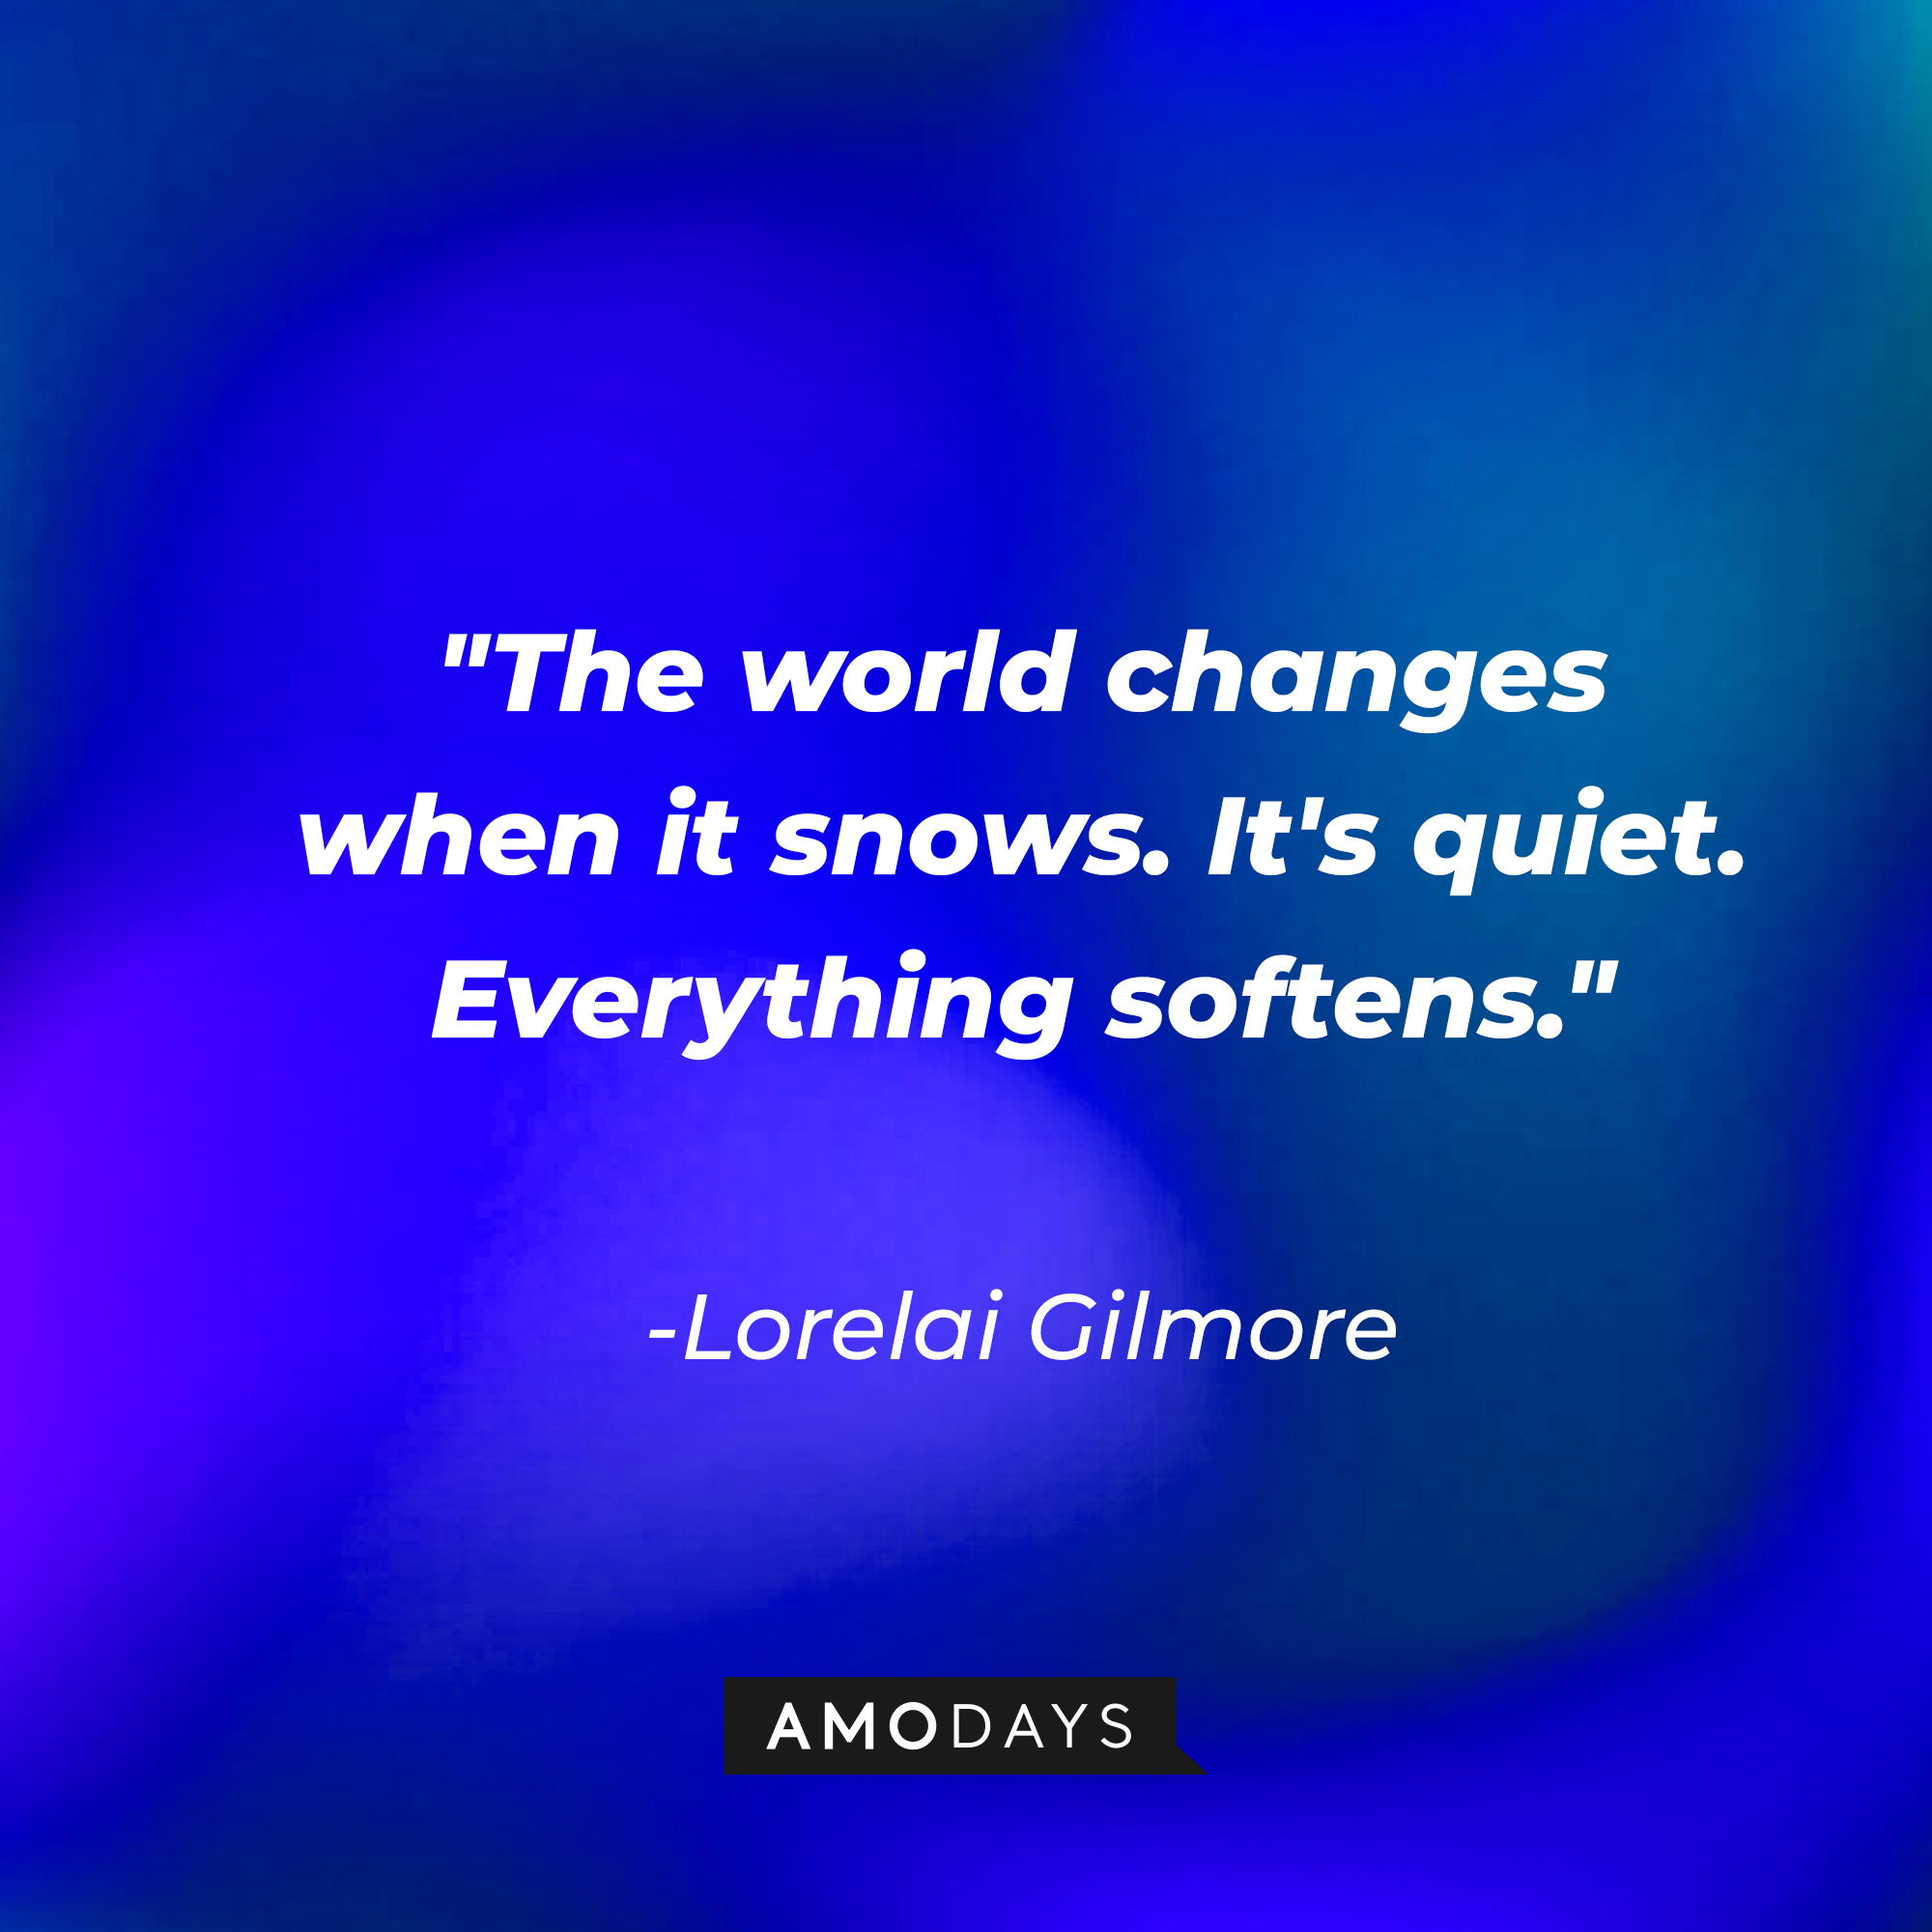 Lorelai Gilmore's quote: "The world changes when it snows. It's quiet. Everything softens." | Source: AmoDays